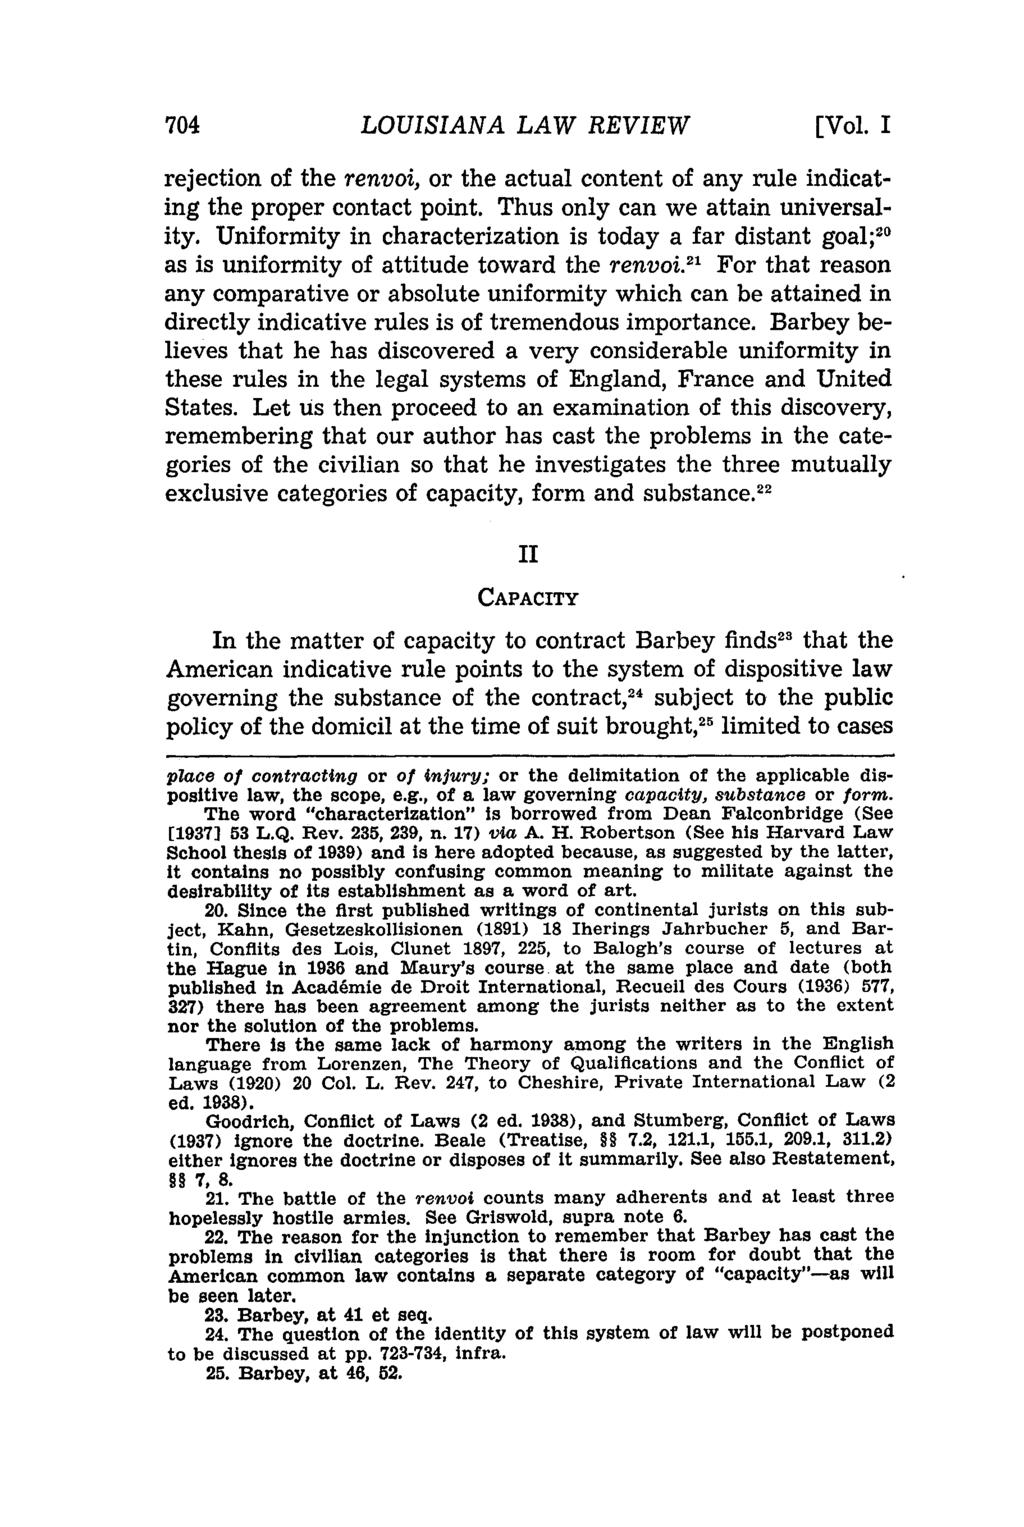 LOUISIANA LAW REVIEW [Vol. I rejection of the renvoi, or the actual content of any rule indicating the proper contact point. Thus only can we attain universality.